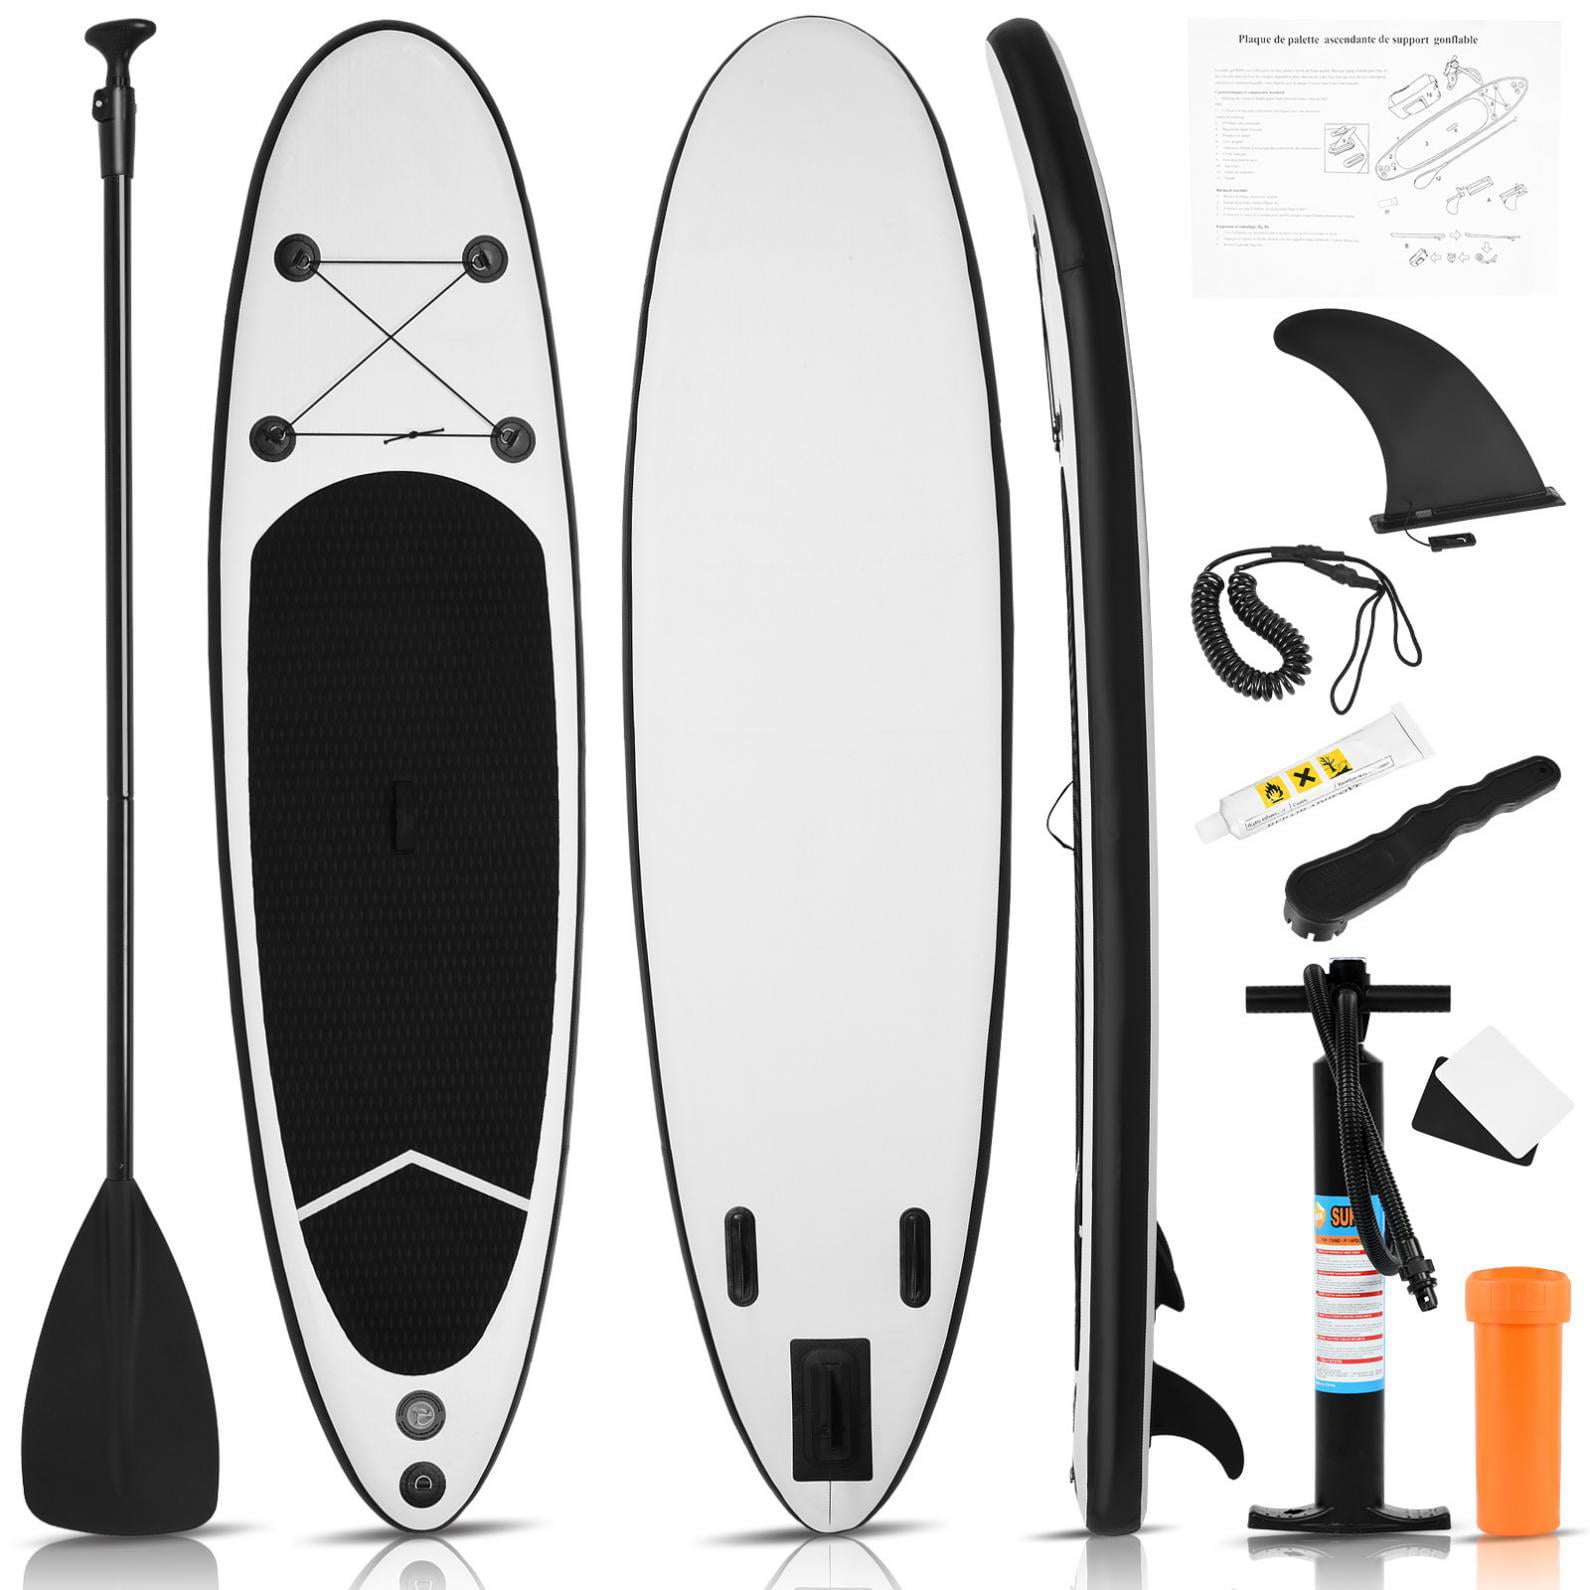 Details about   New 10' Yoga Inflatable Stand Up Paddle Board W/Carry Bag Adjustable Paddle 